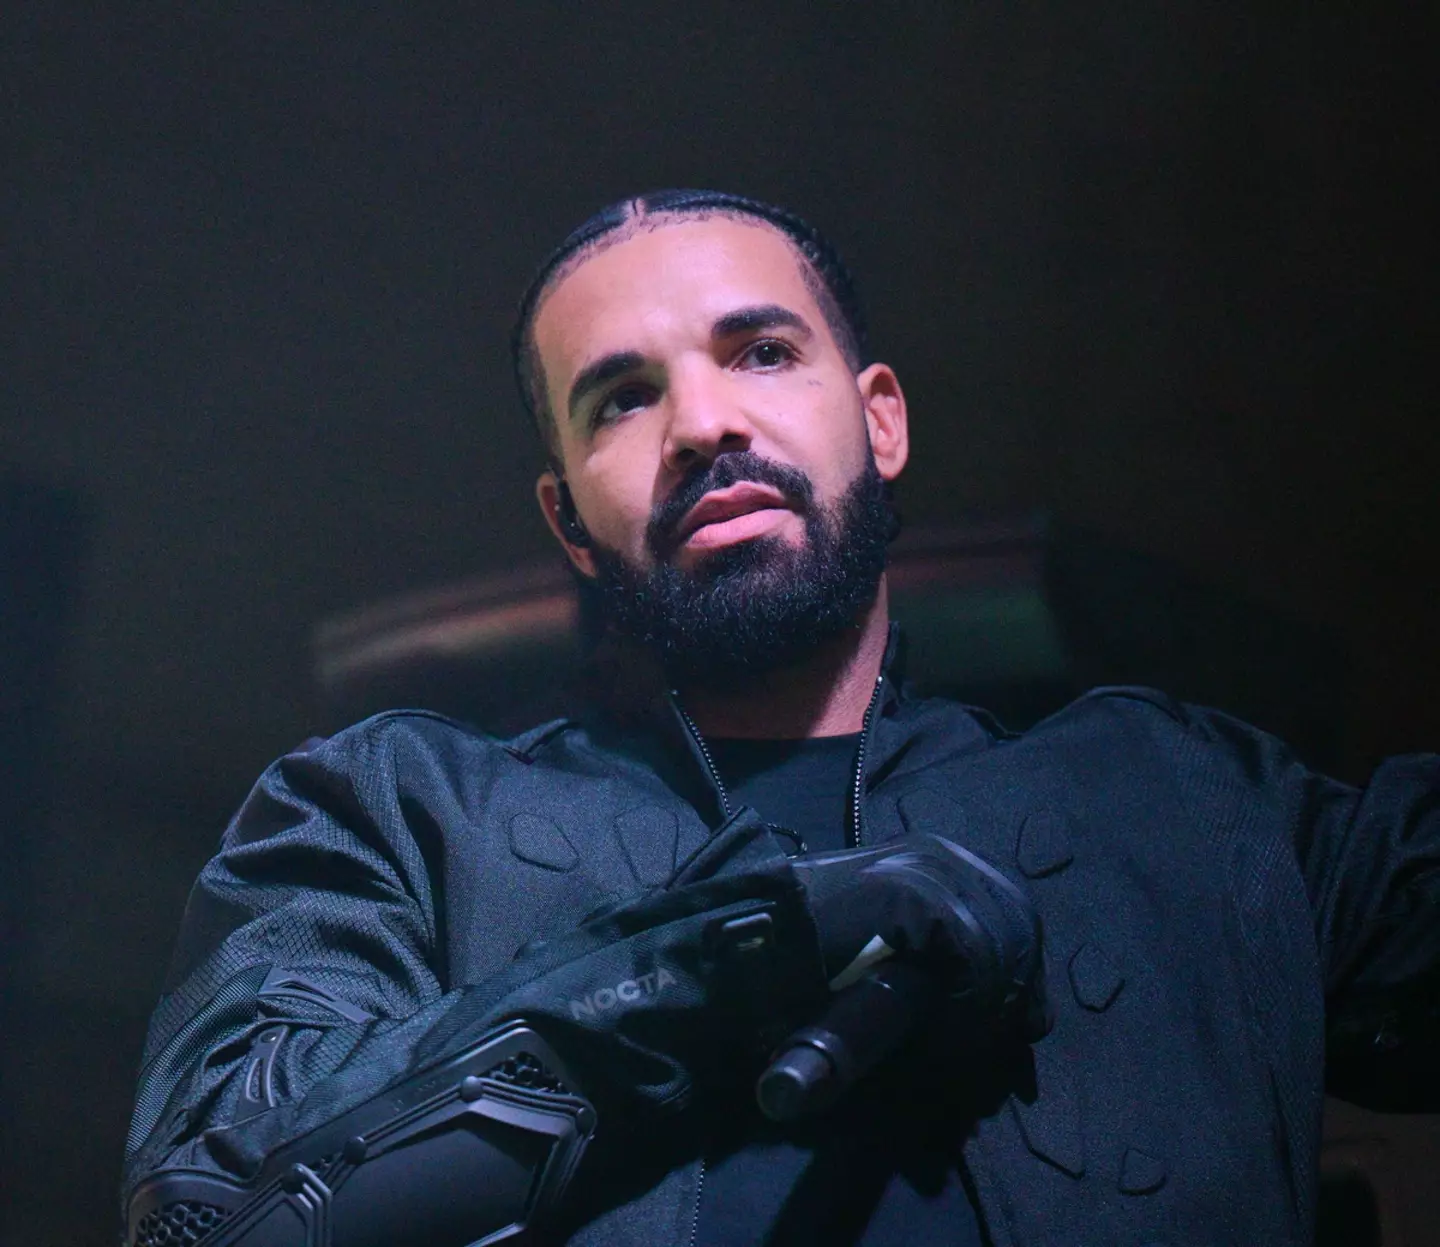 Drake has spoken out about the viral video.